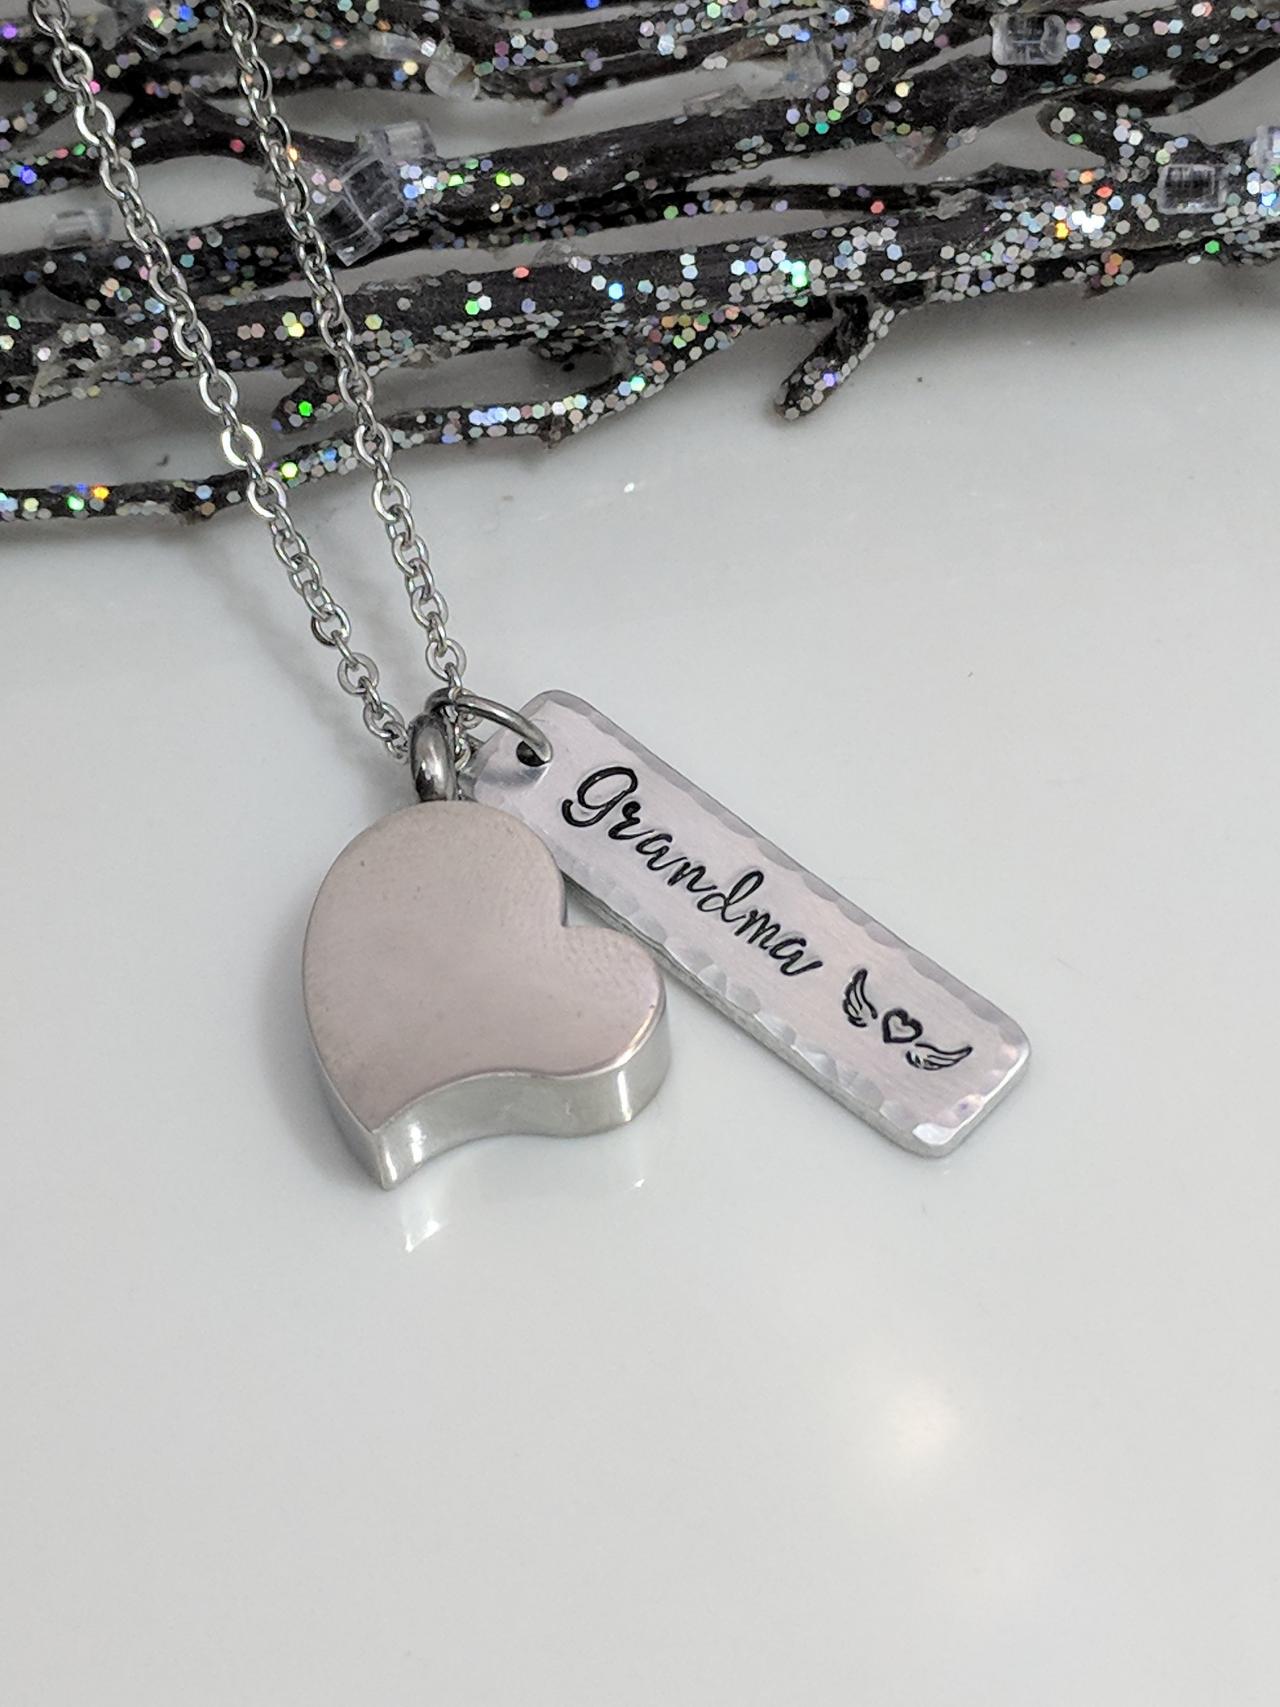 Hand Stamped Necklace Heart Urn For Ashes-heart Urn Pendant-cremation Hand Stamped Jewelry-personalized-loss Of Grandma-urn Necklace-memorial